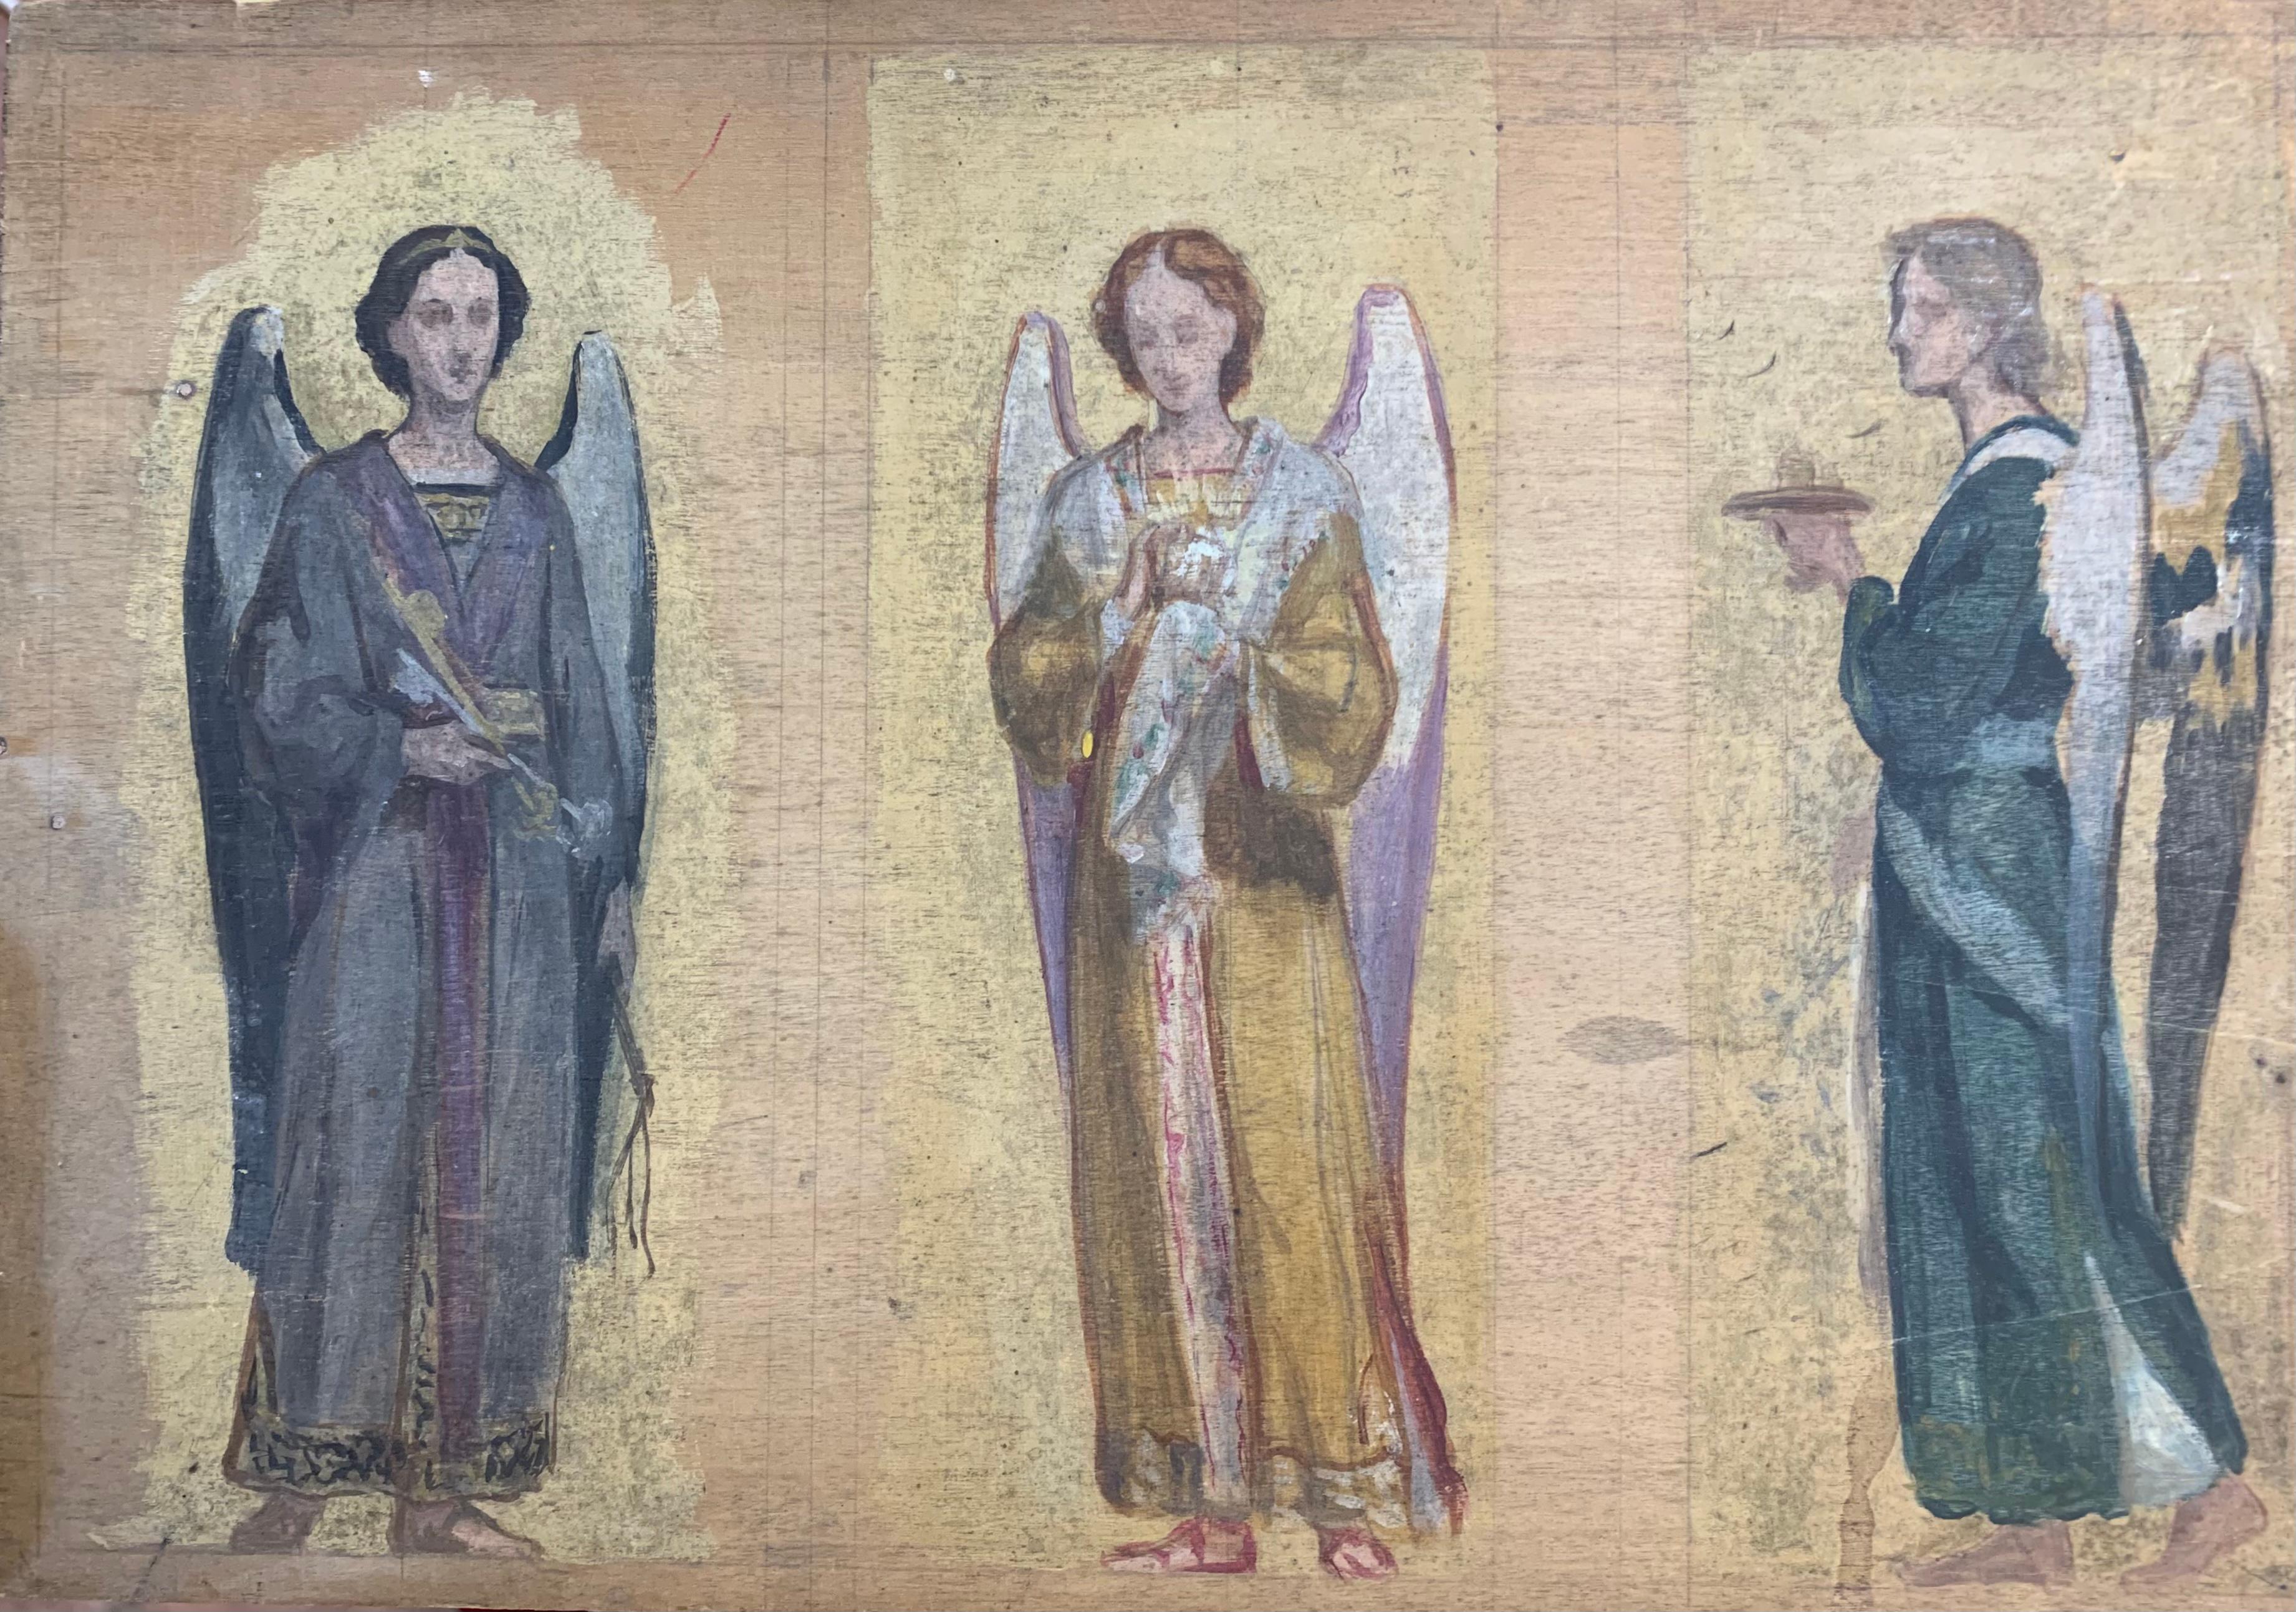 Sketch for frescoes with angels, on both sides of the panel. Late 19th century  - Painting by Unknown